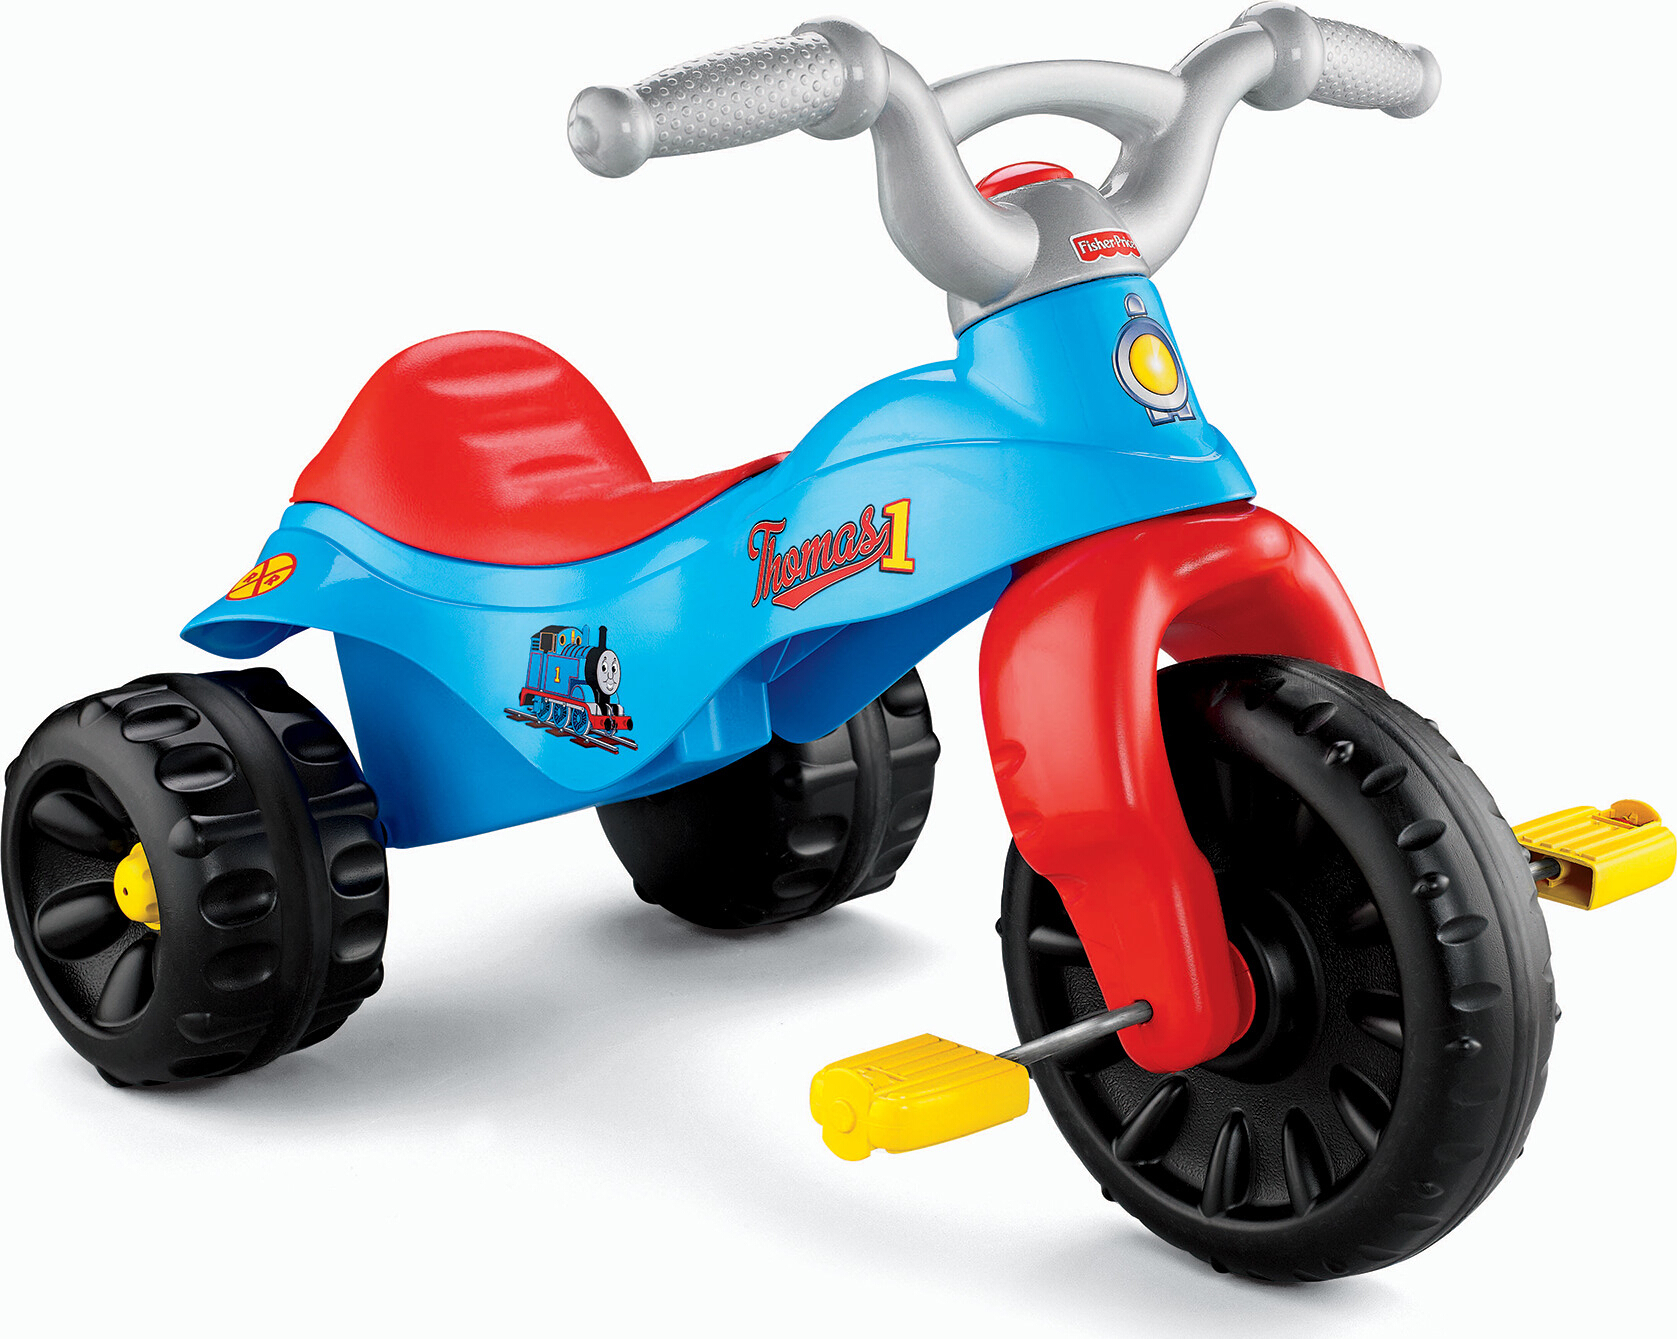 Thomas & Friends Tough Trike Push & Pedal Ride-On Toddler Tricycle - image 1 of 6